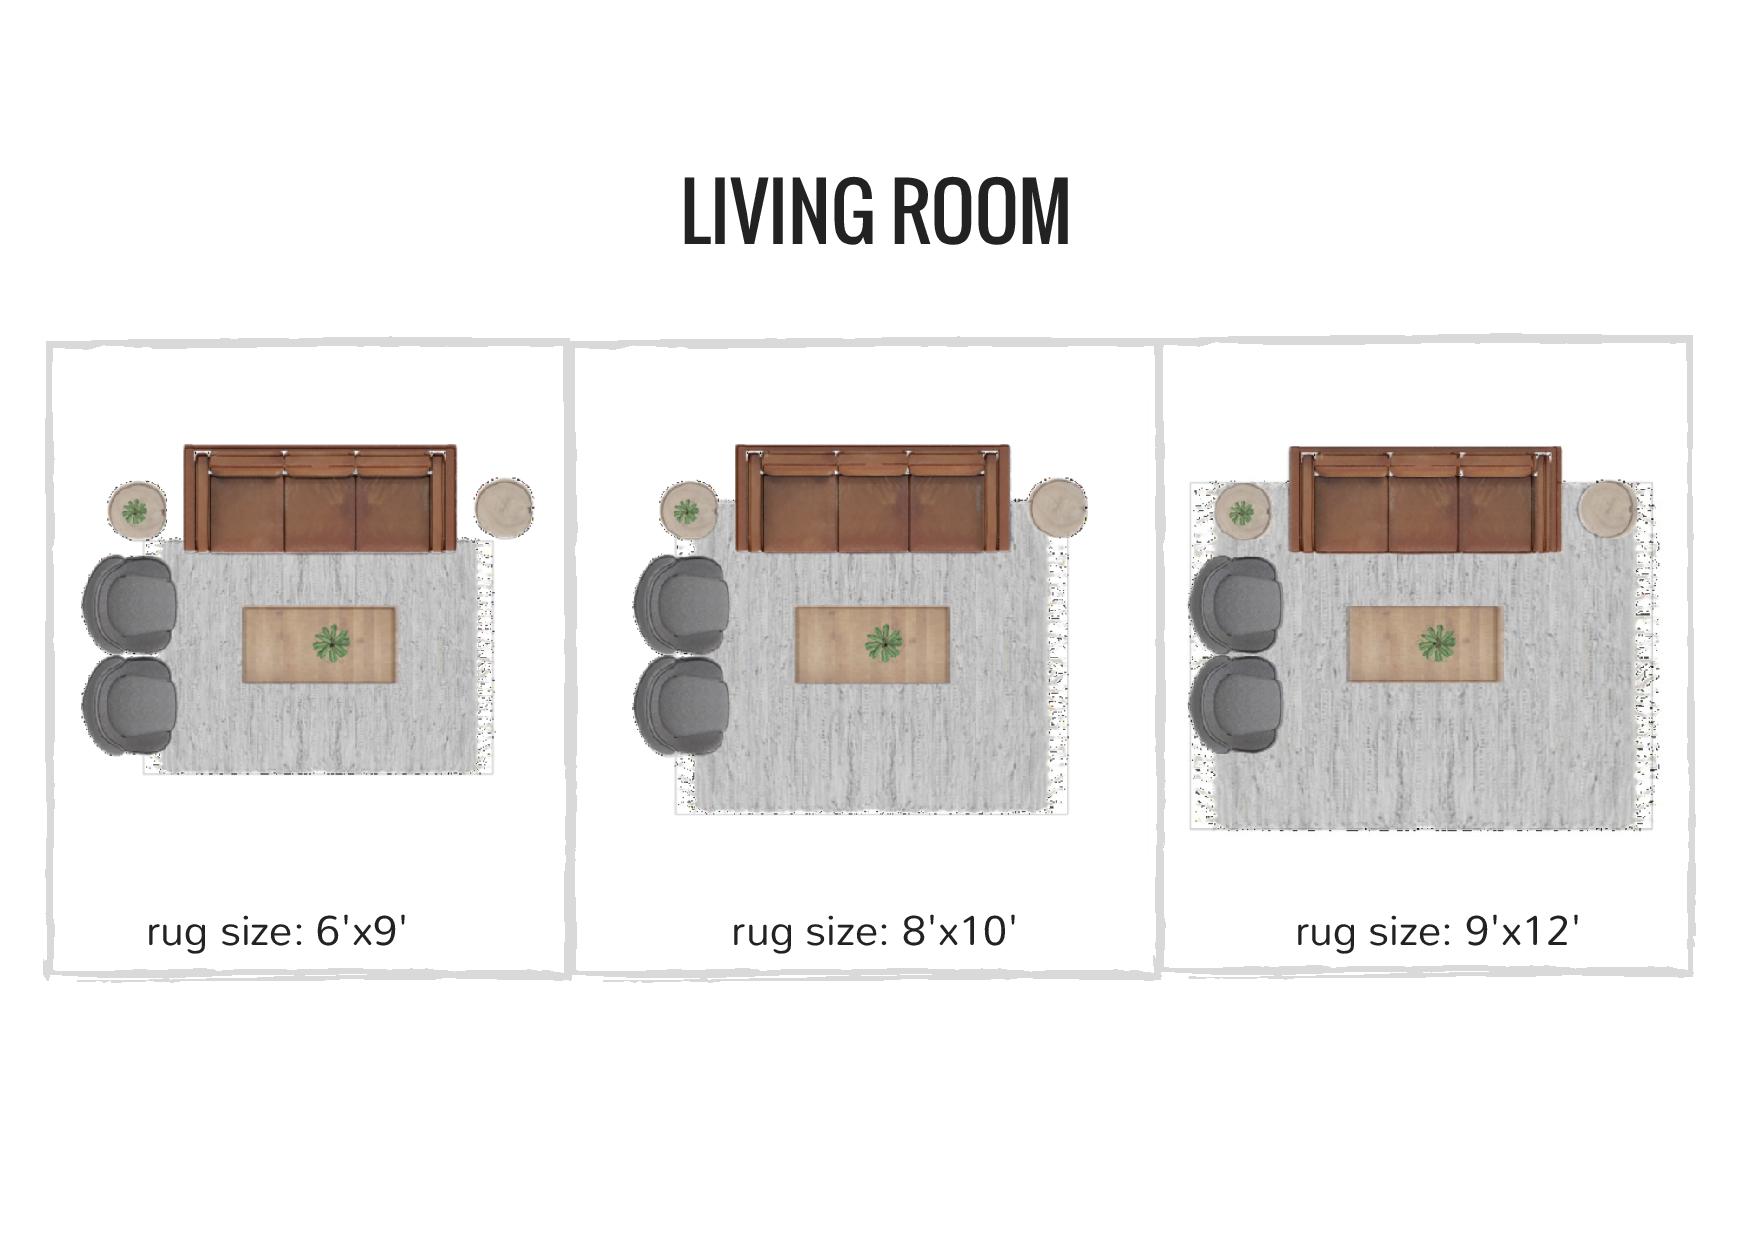 rug sizing and placement guide - what size rug do you need for your living room